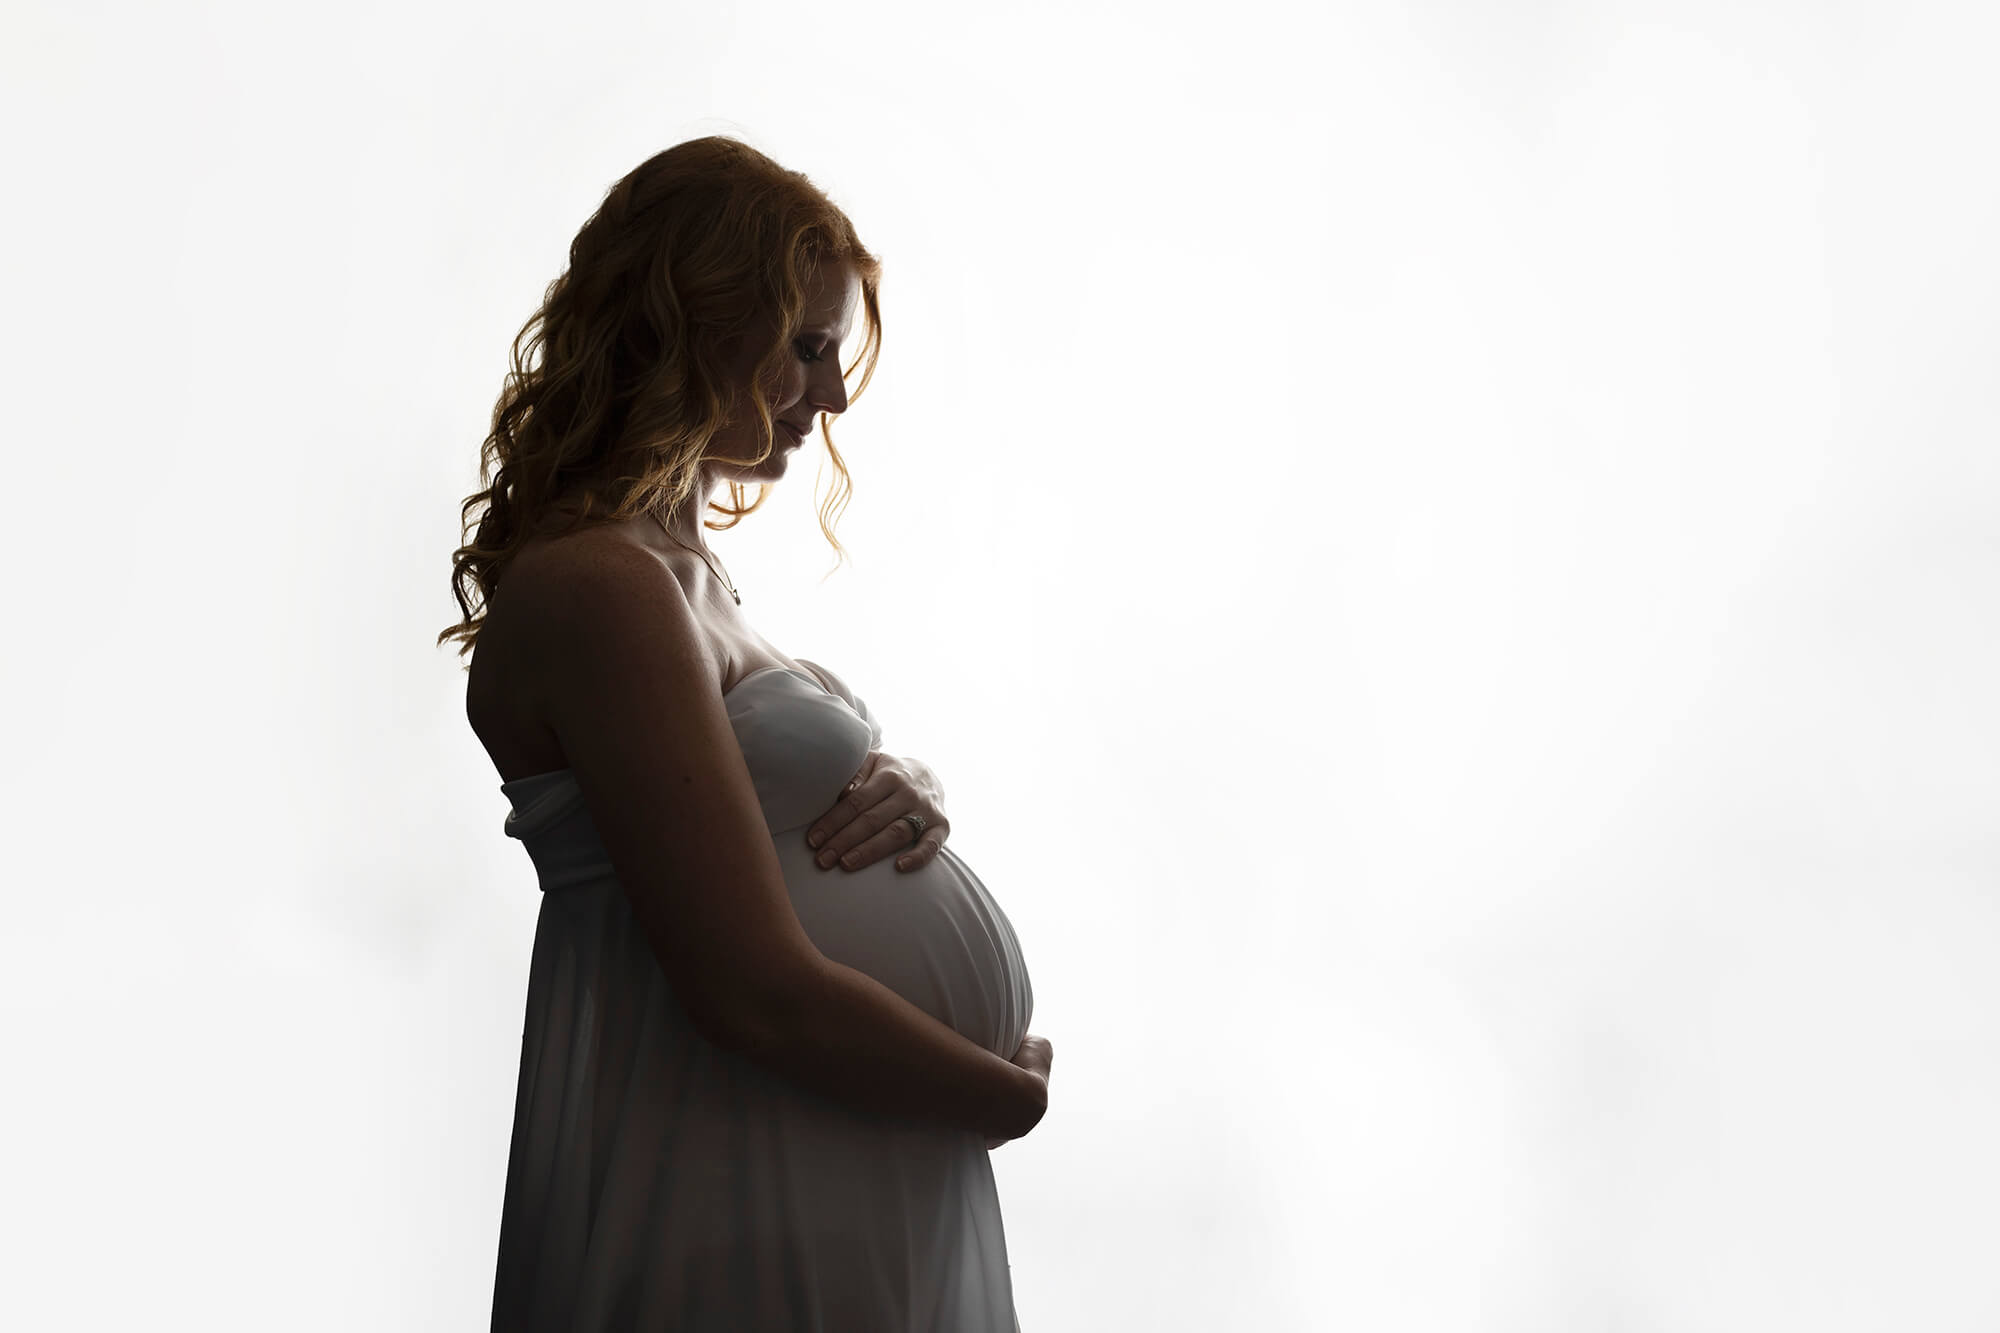 Silhouette of a pregnant lady hugging her baby bump.